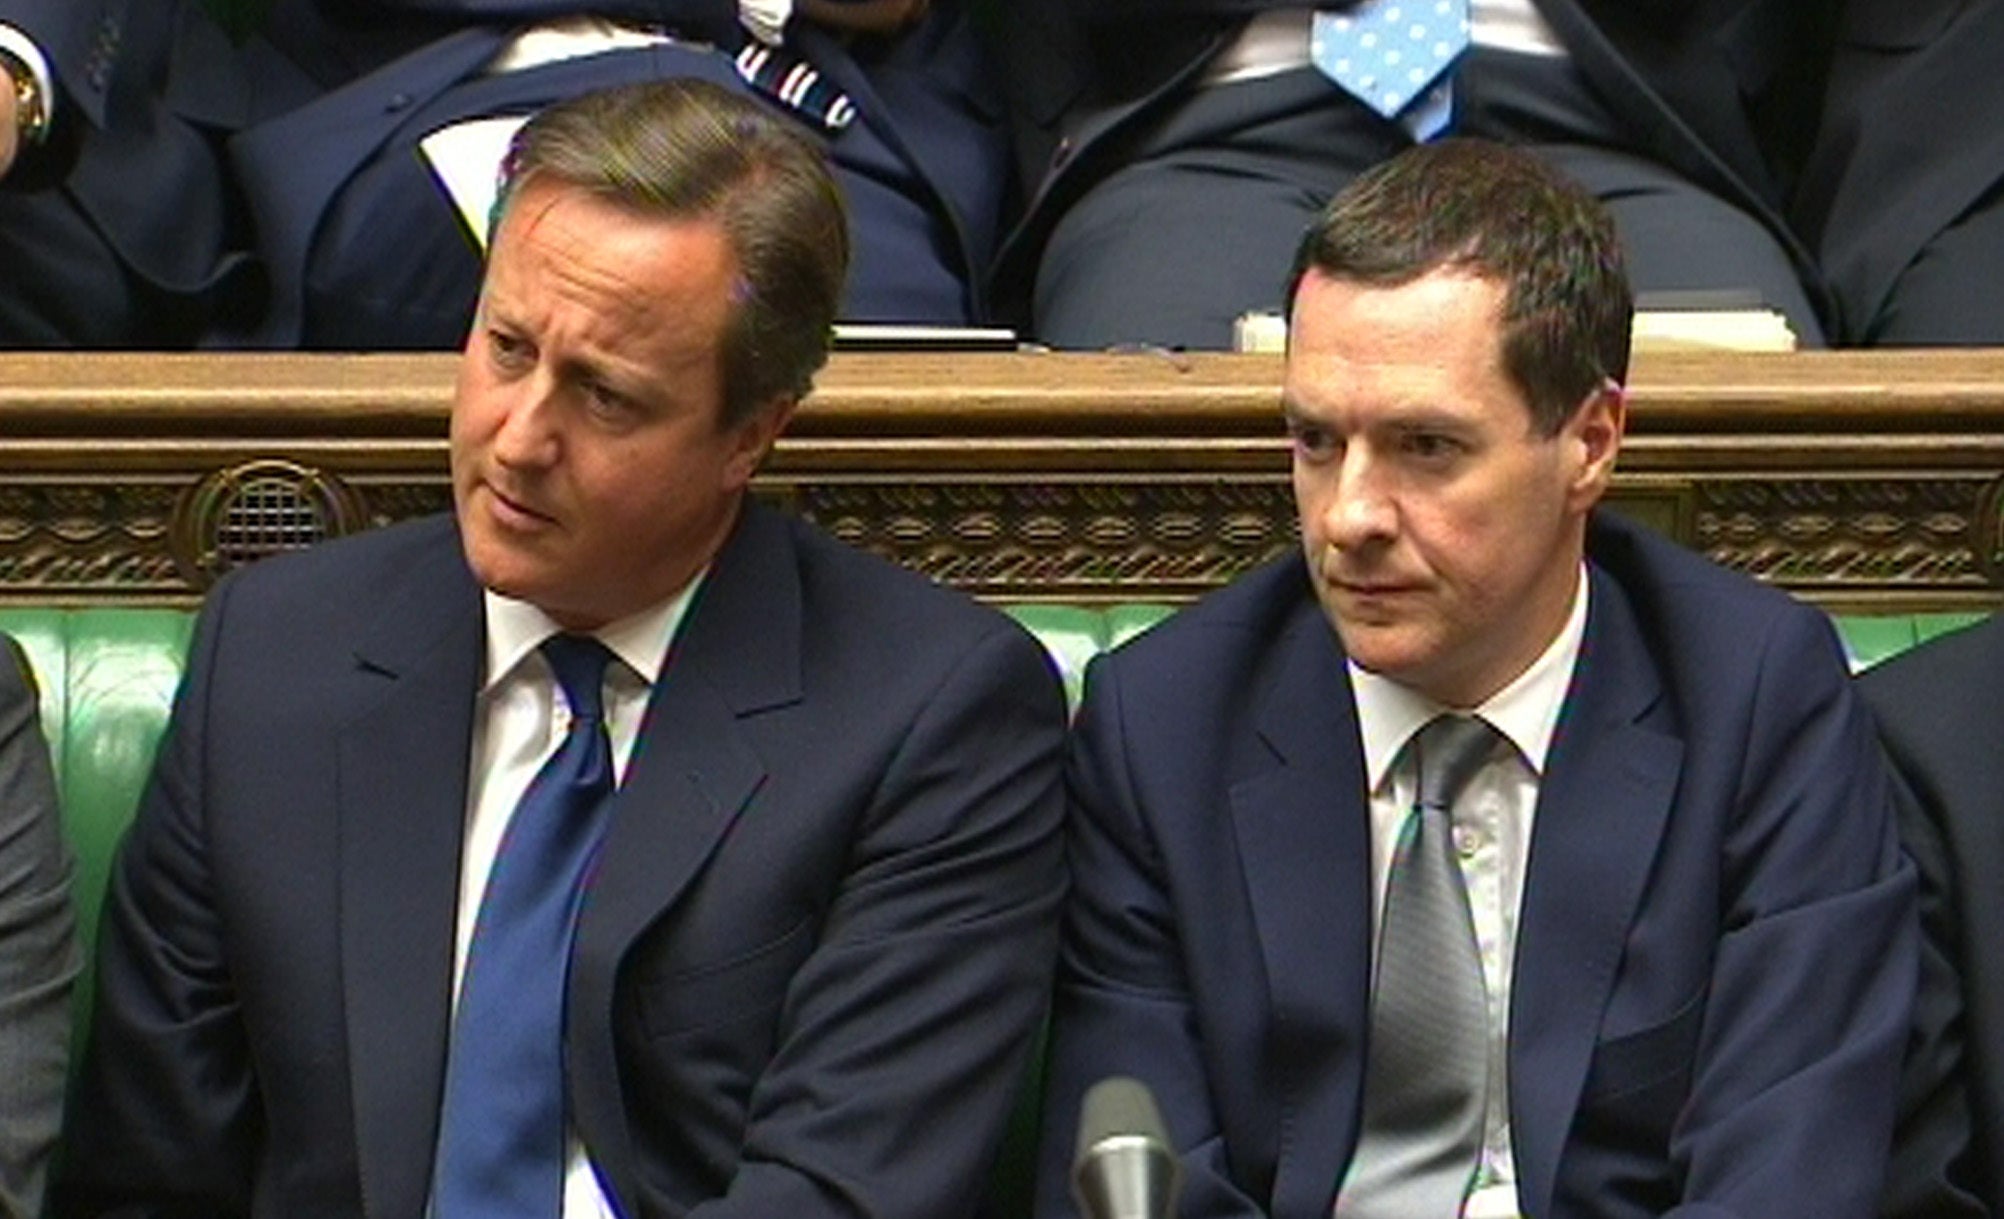 The arrogant abrasiveness of Mr Osborne and Mr Hunt echoes the callous, bellicose worst of the Thatcher era.